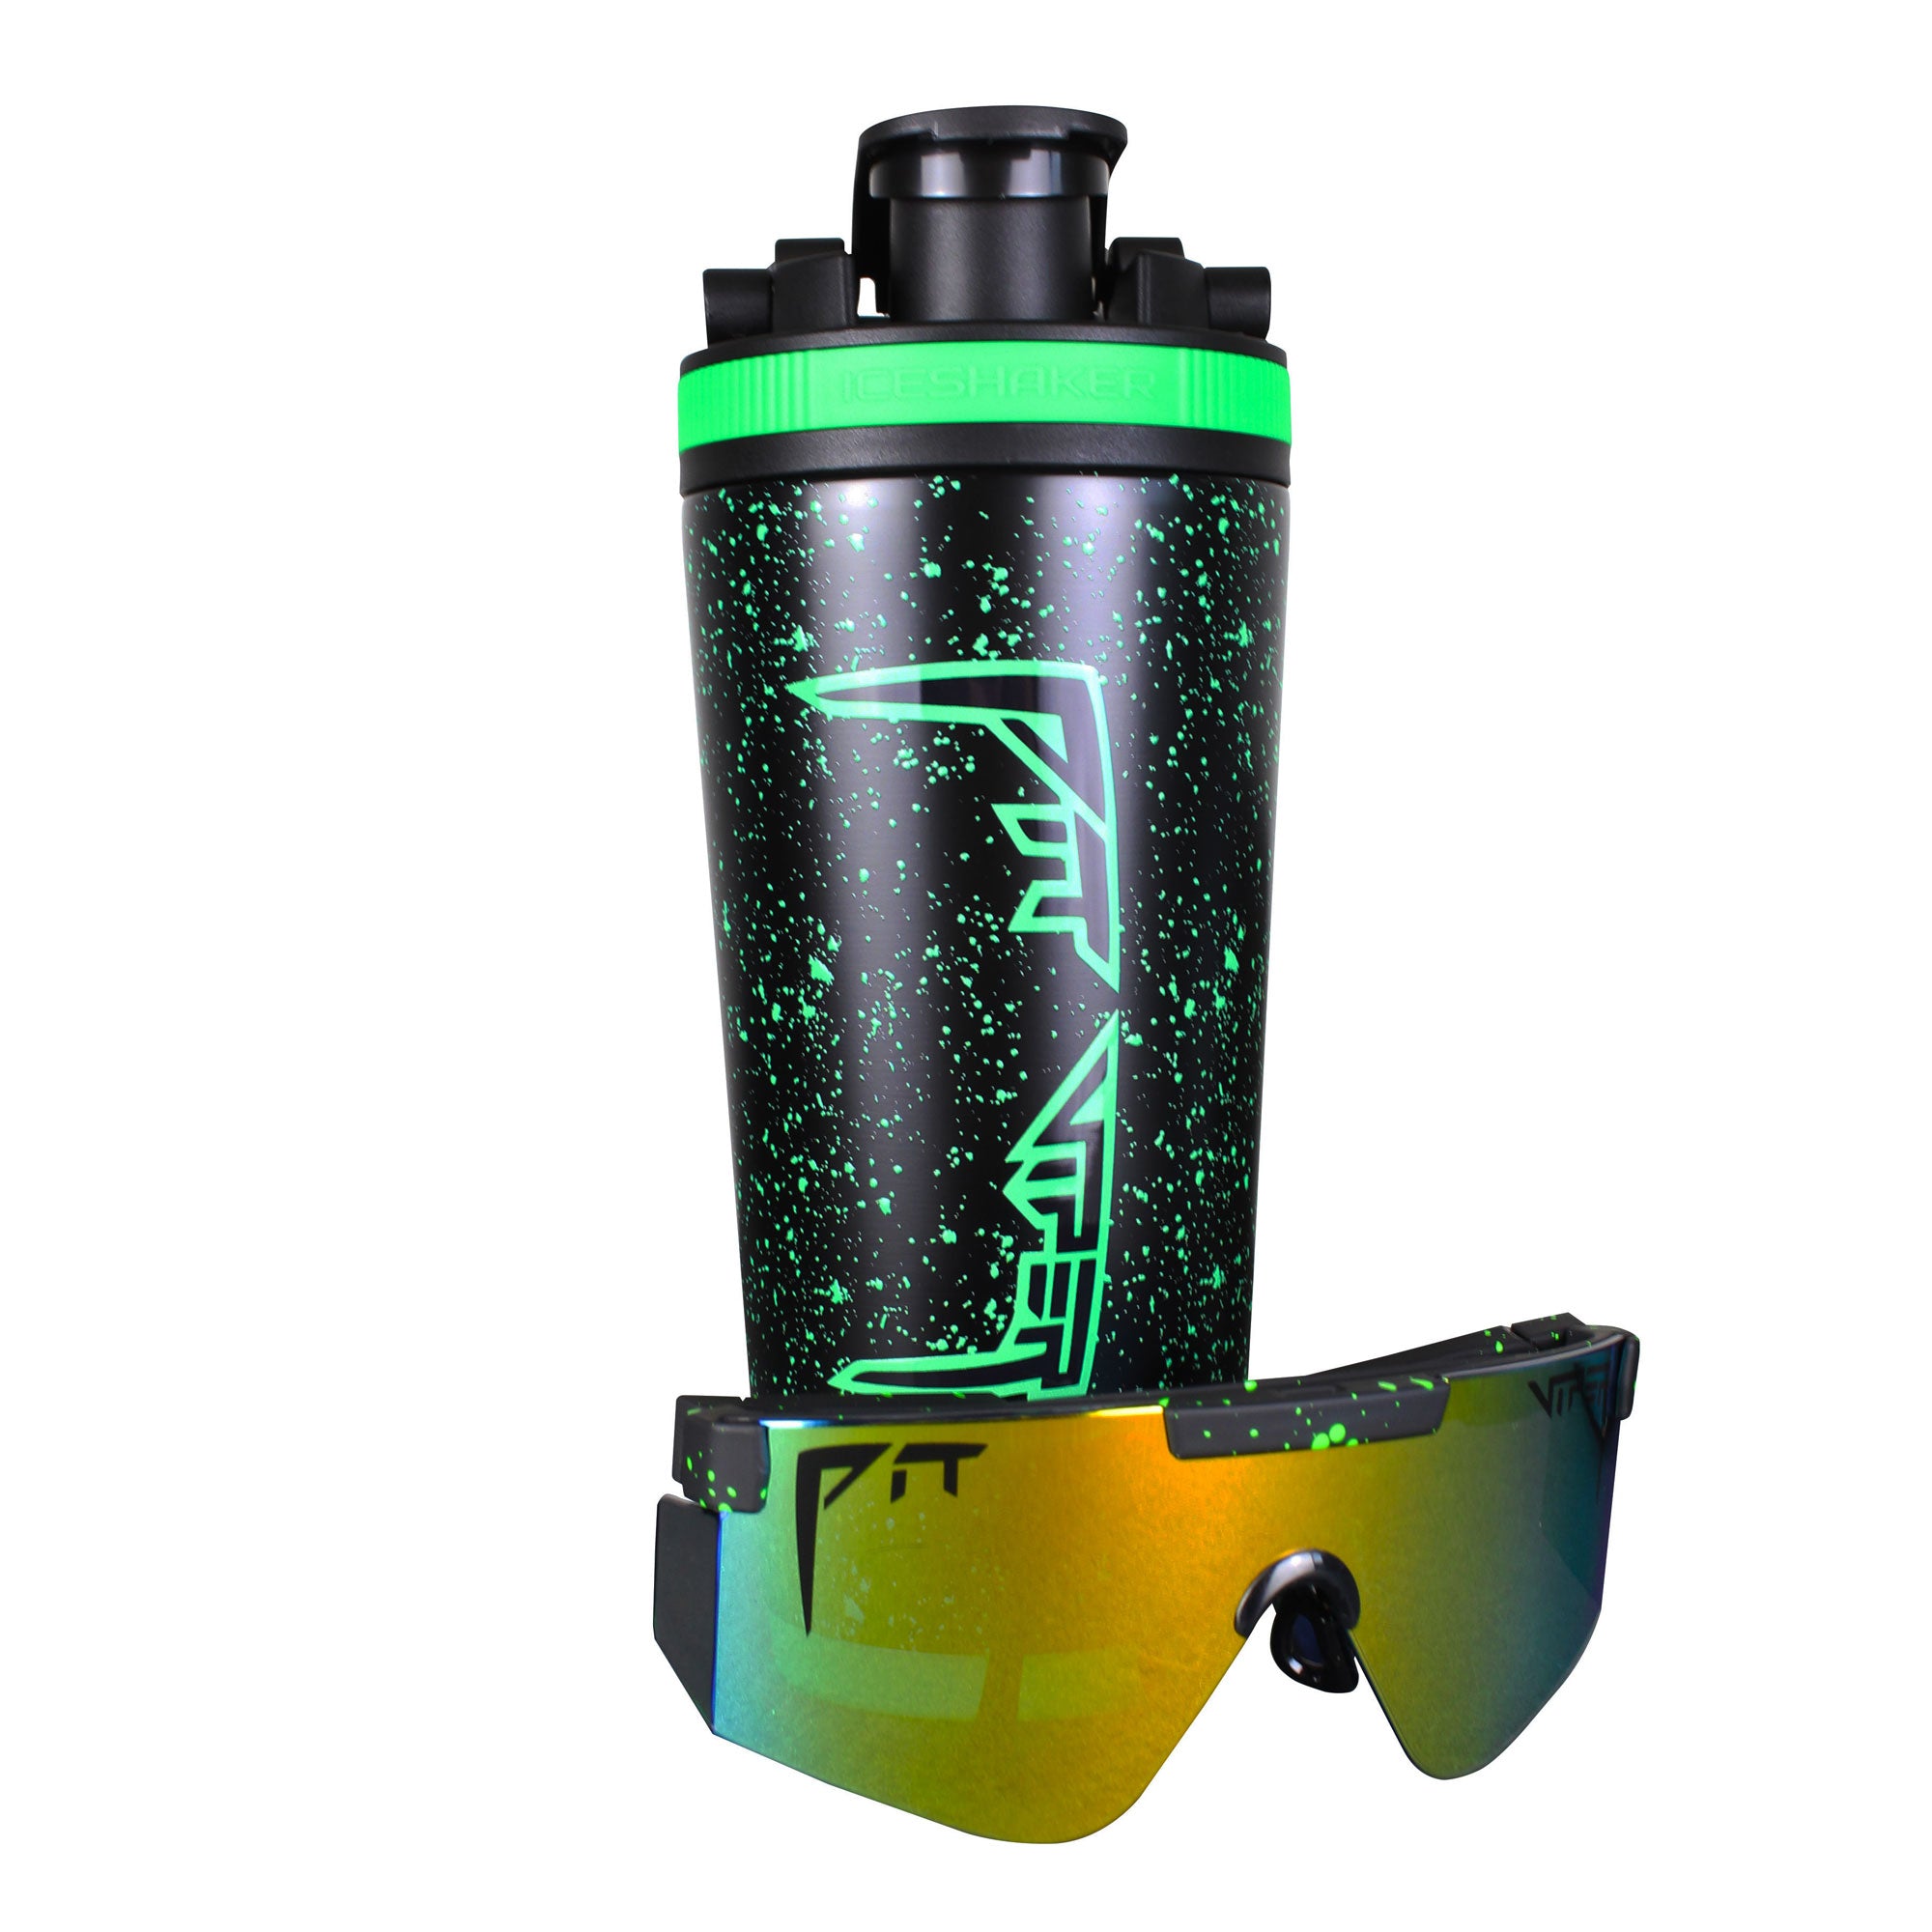 Branded Ice Shaker Insulated Bottle - Affiliate Supplements